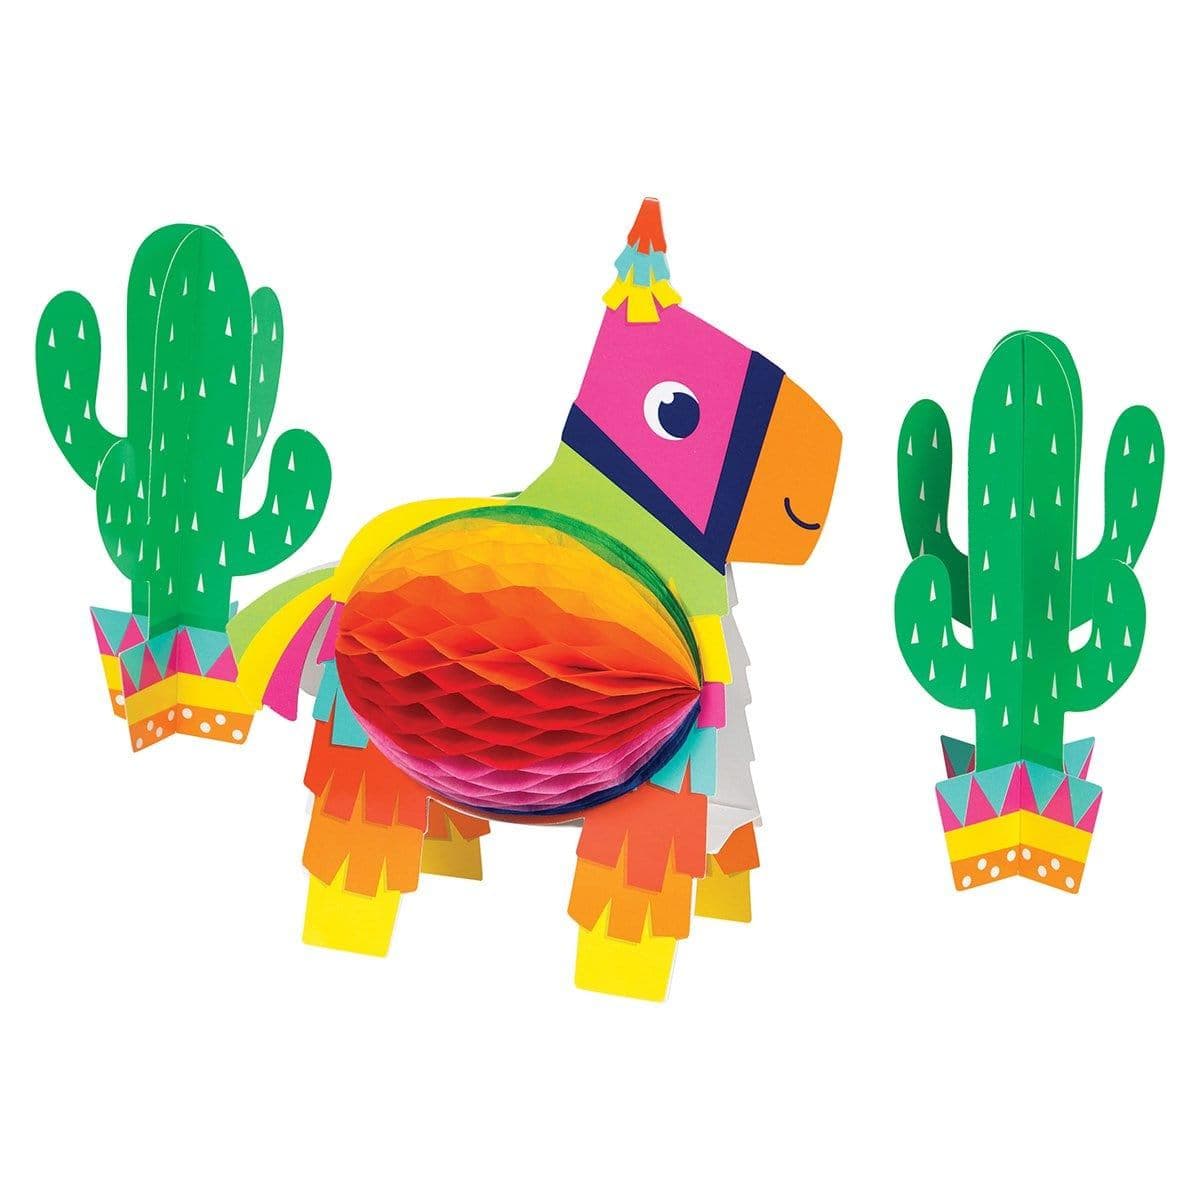 Buy Theme Party Mexican Fiesta Centerpiece sold at Party Expert